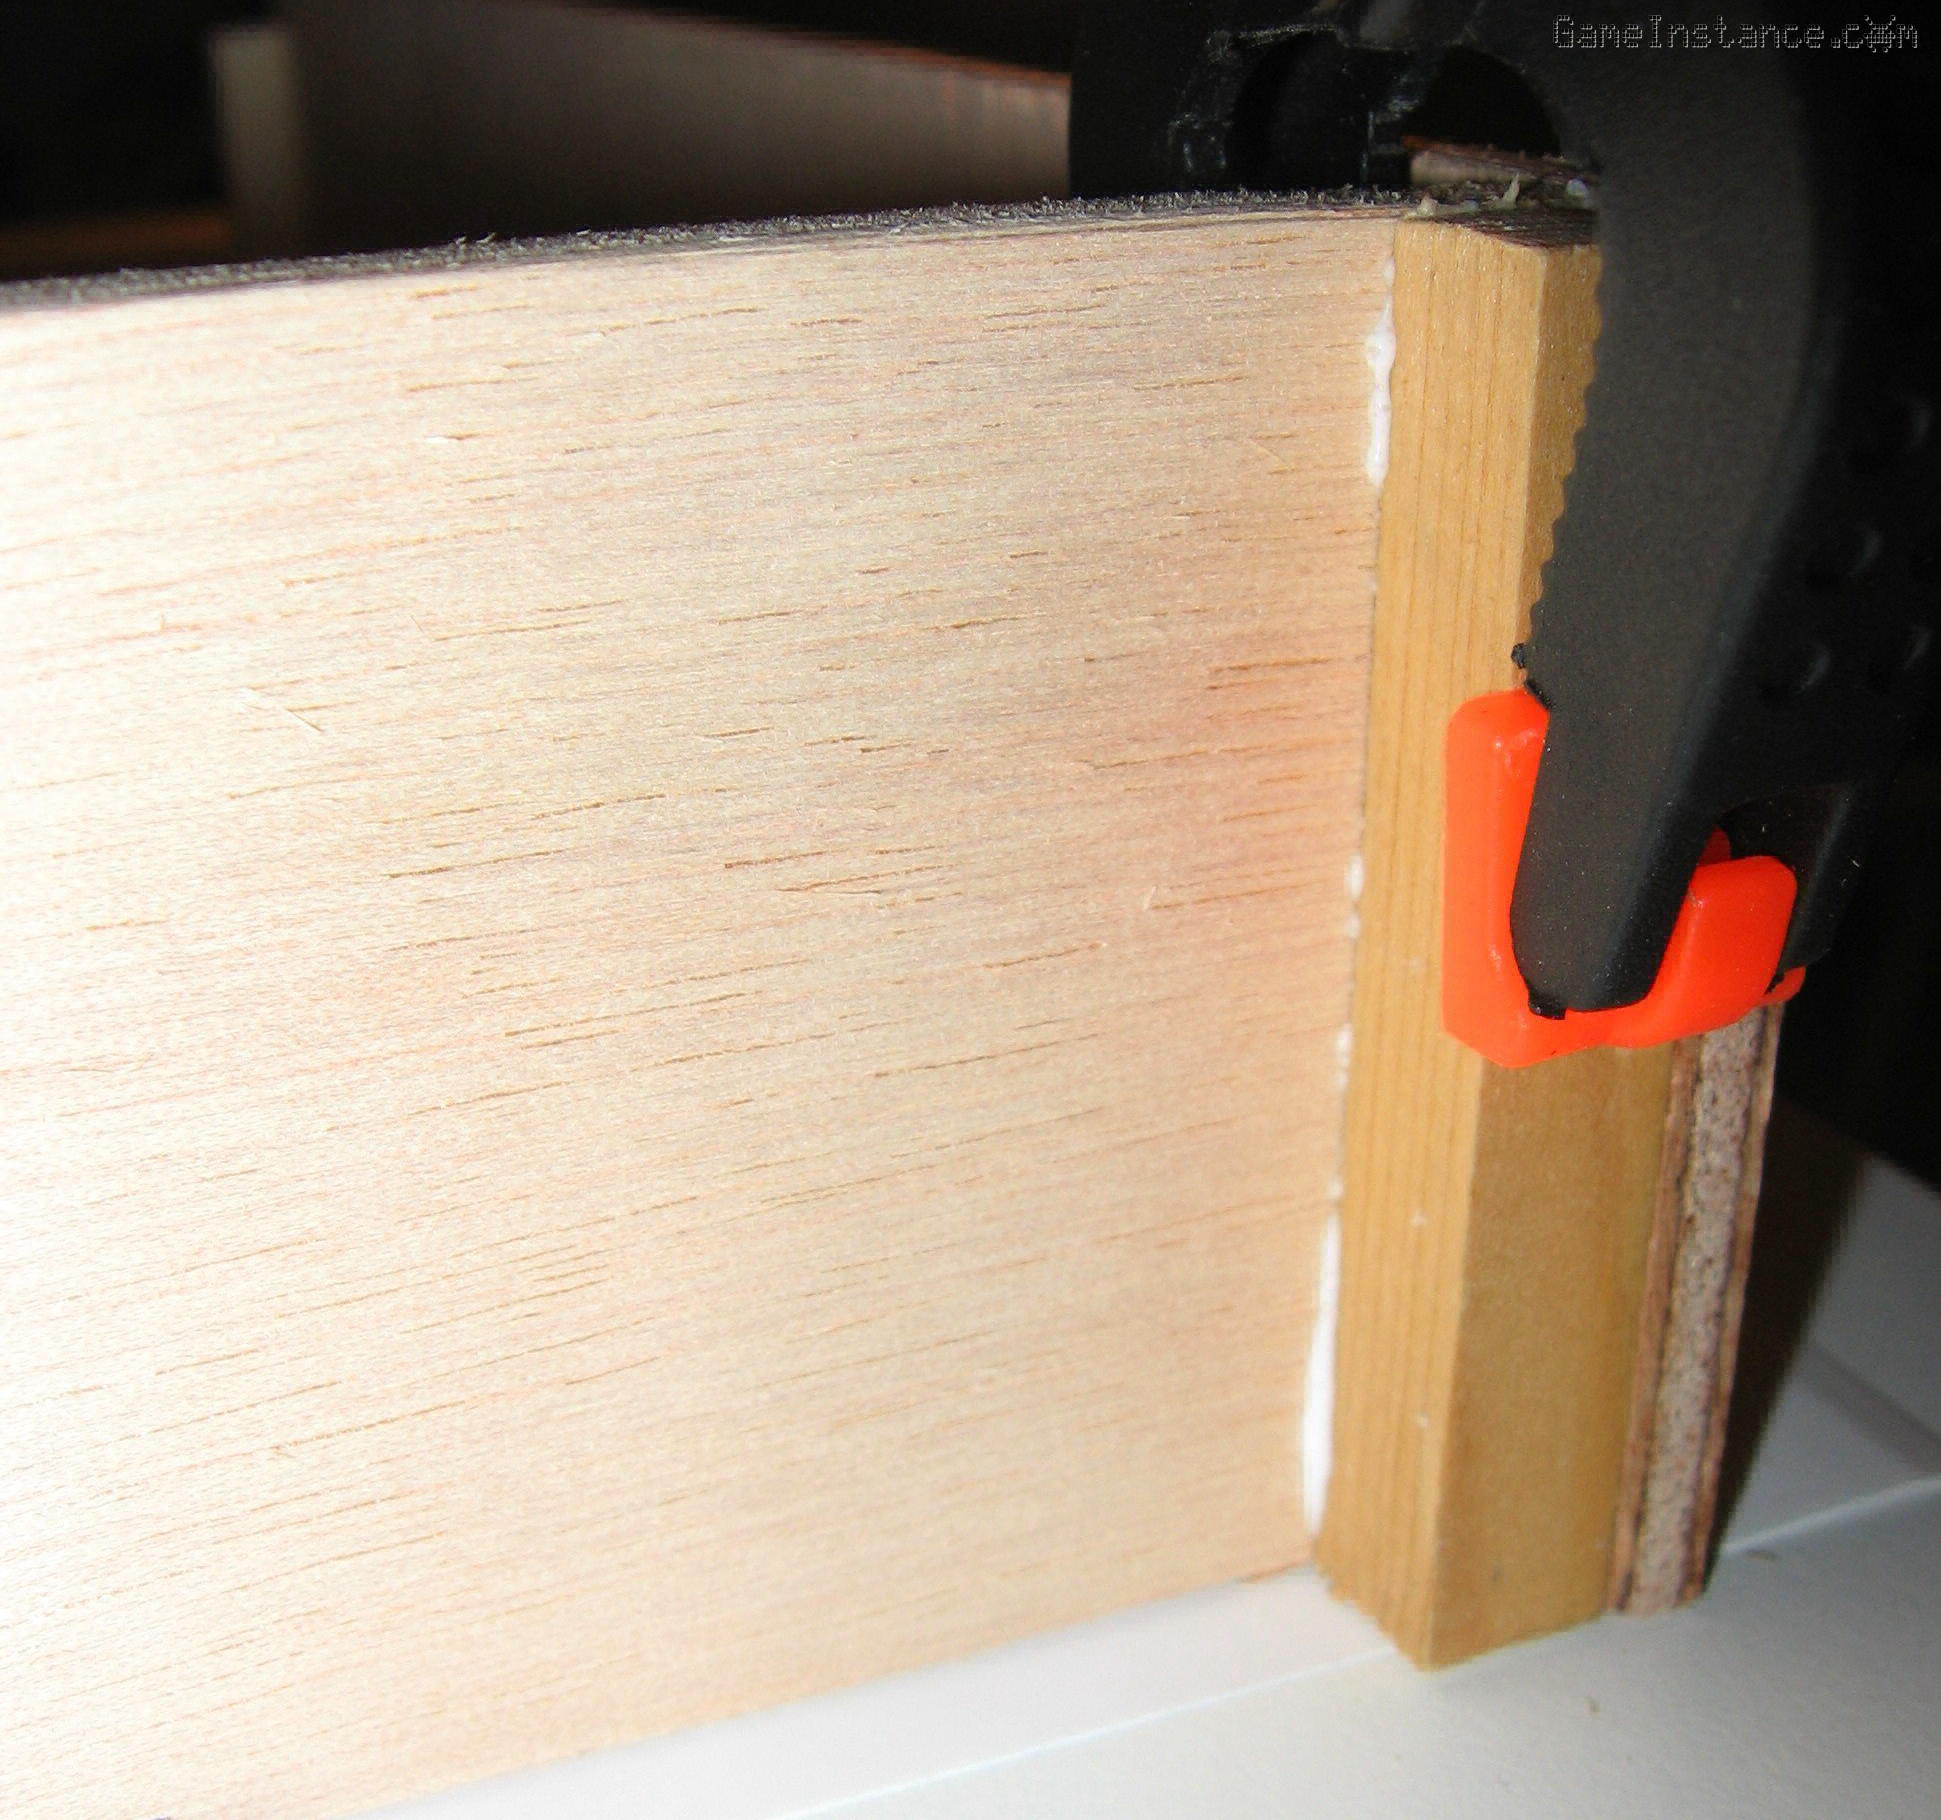 UV-Box - 9x9 mm wooden sections reinforcing the perpendicular joints between plywood panels